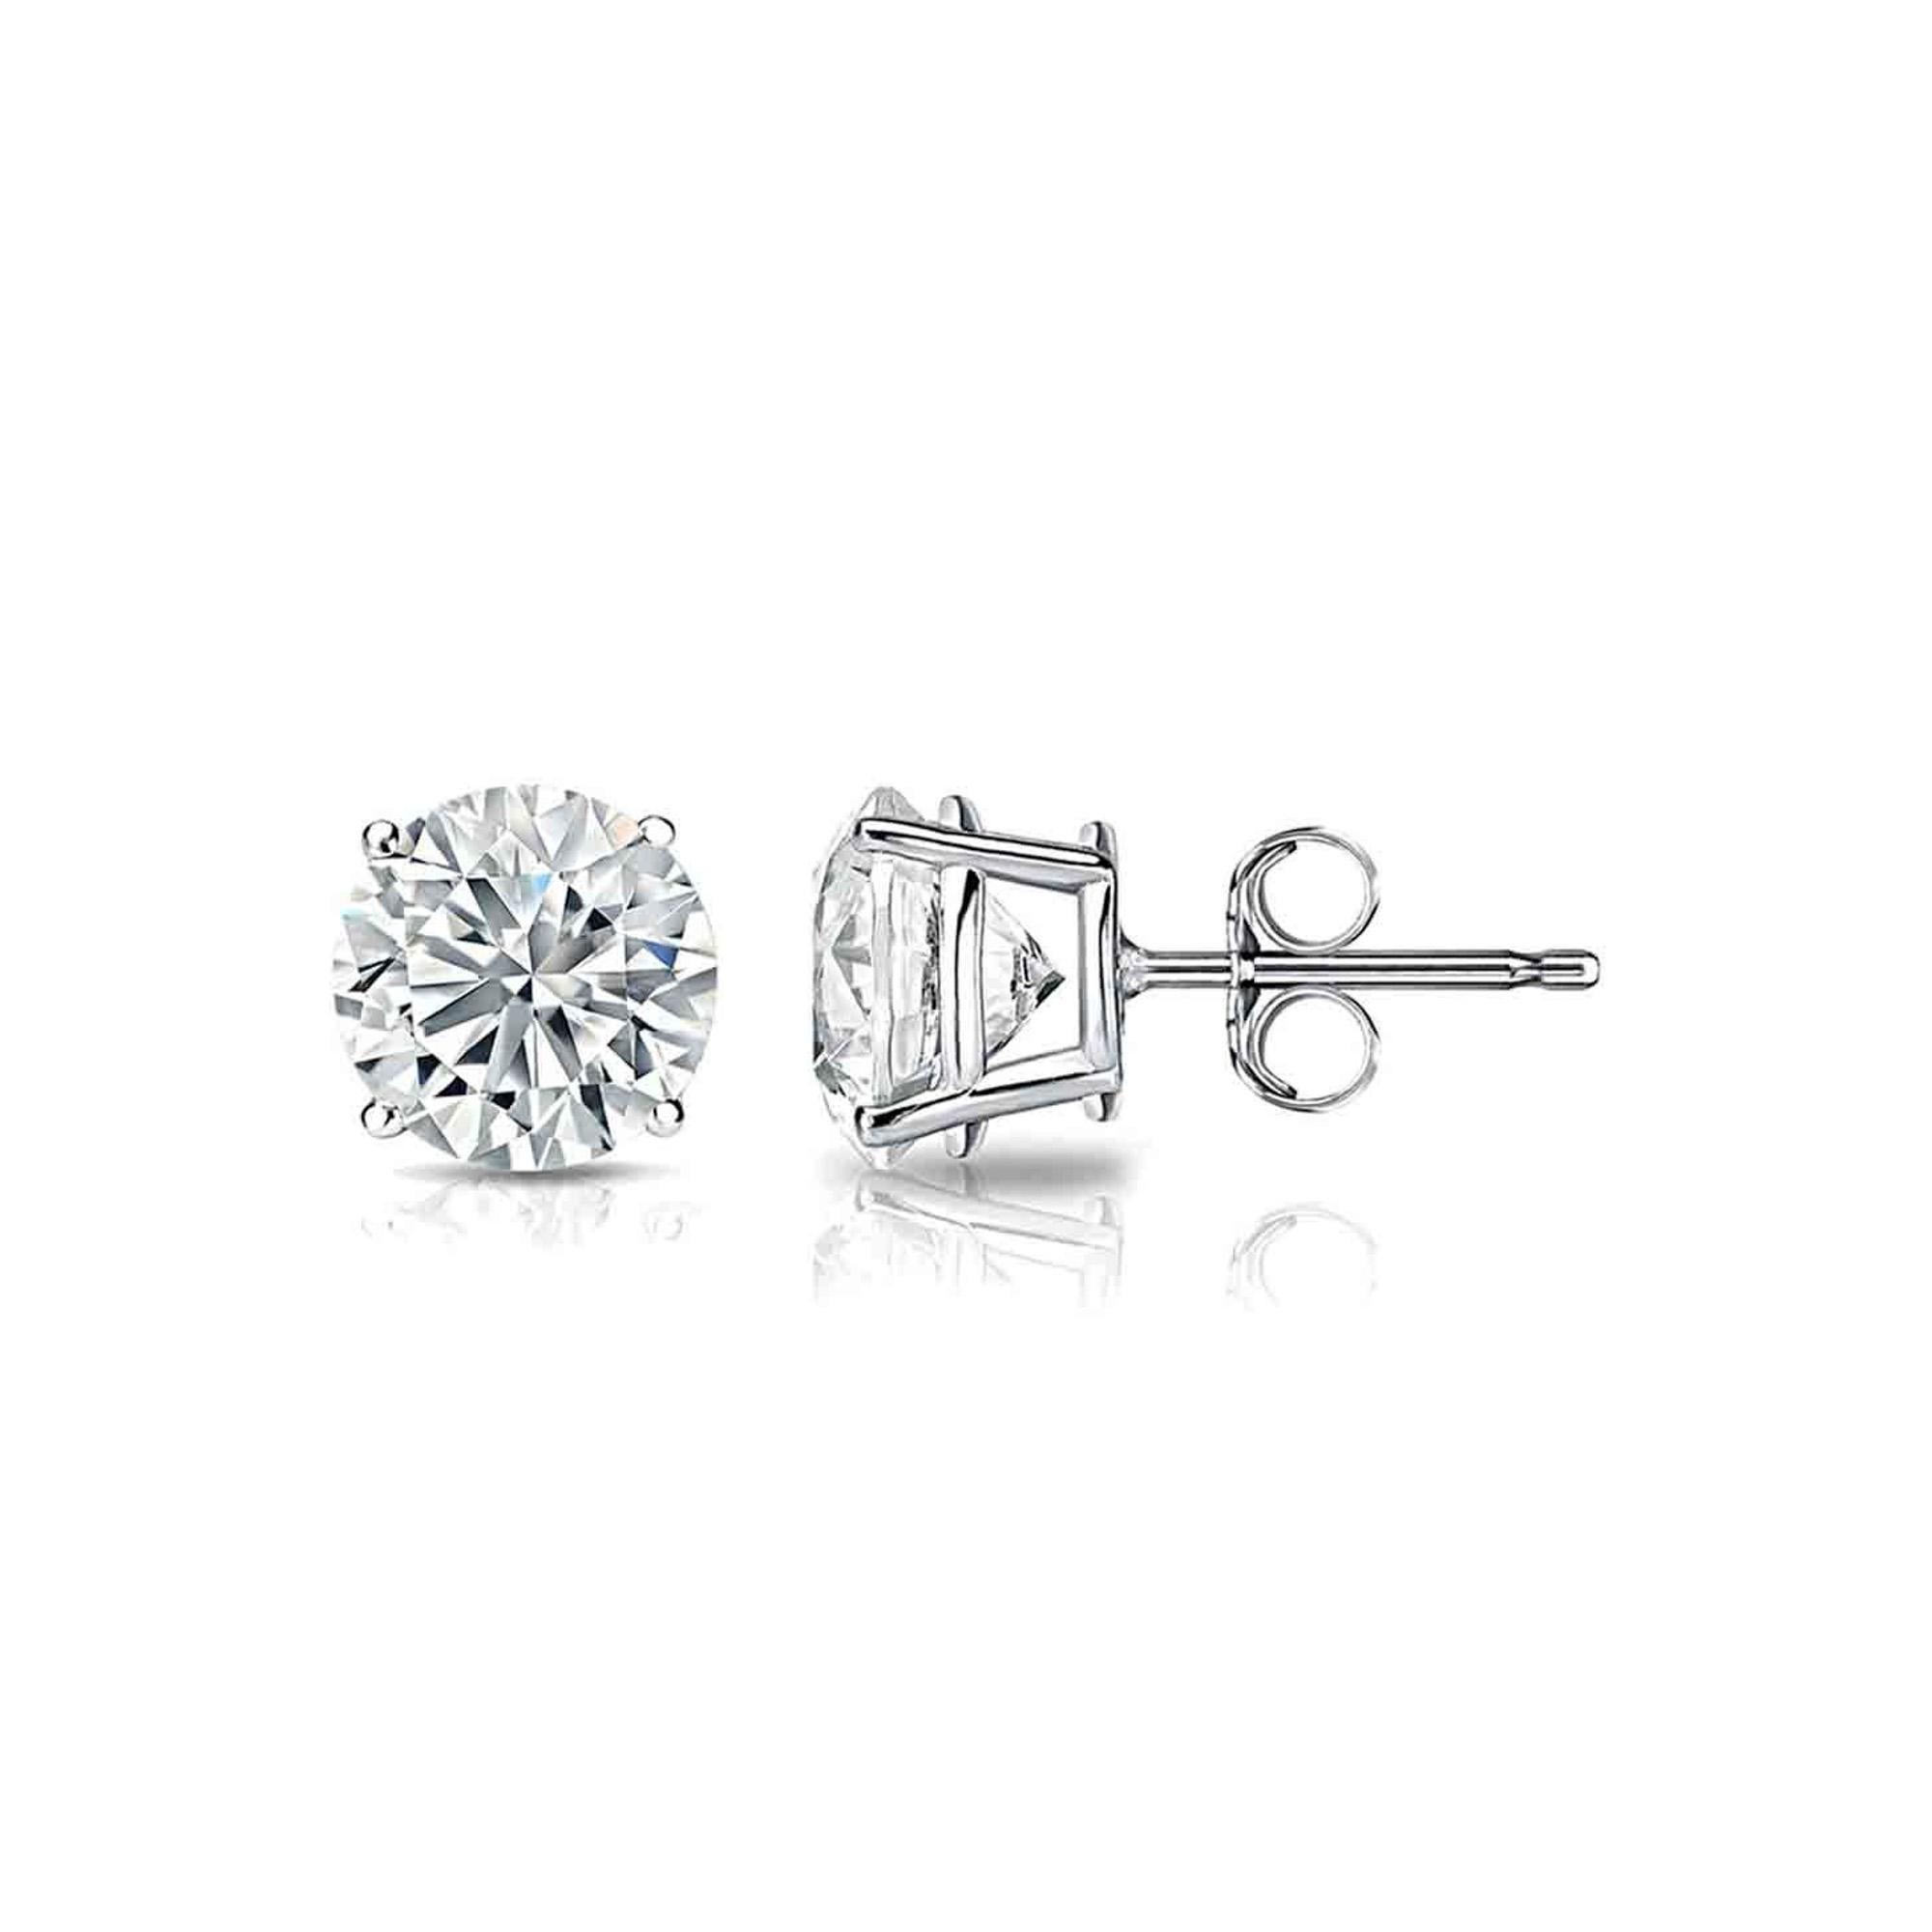 Brilliant Cut Diana M. 14kt white gold diamond stud earrings containing 2.00 cts tw  For Sale